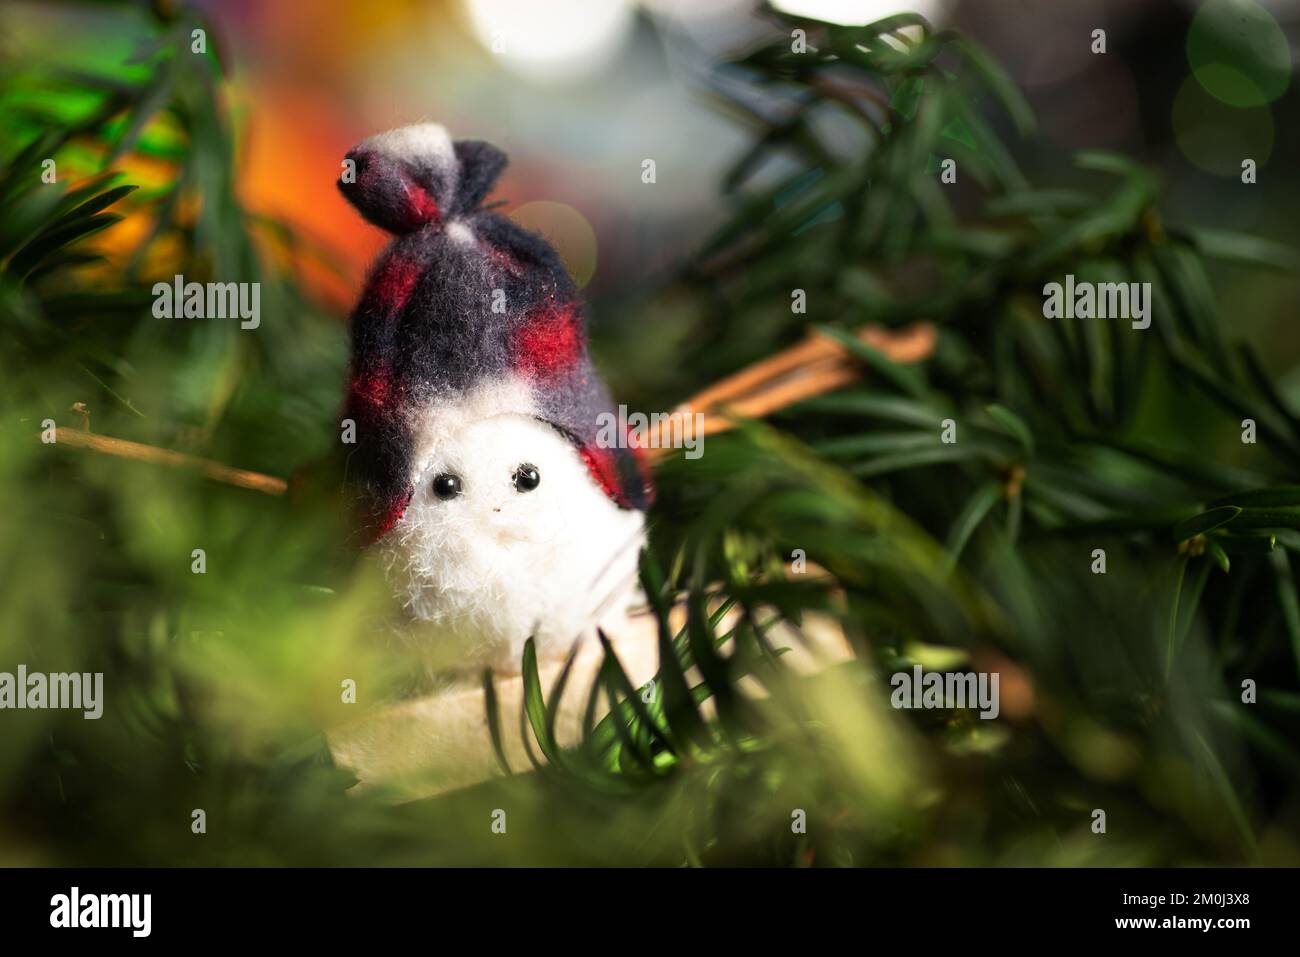 Toy snowman with festive winter holiday decoration and the Christmas tree with shiny fairy lights in the background Stock Photo